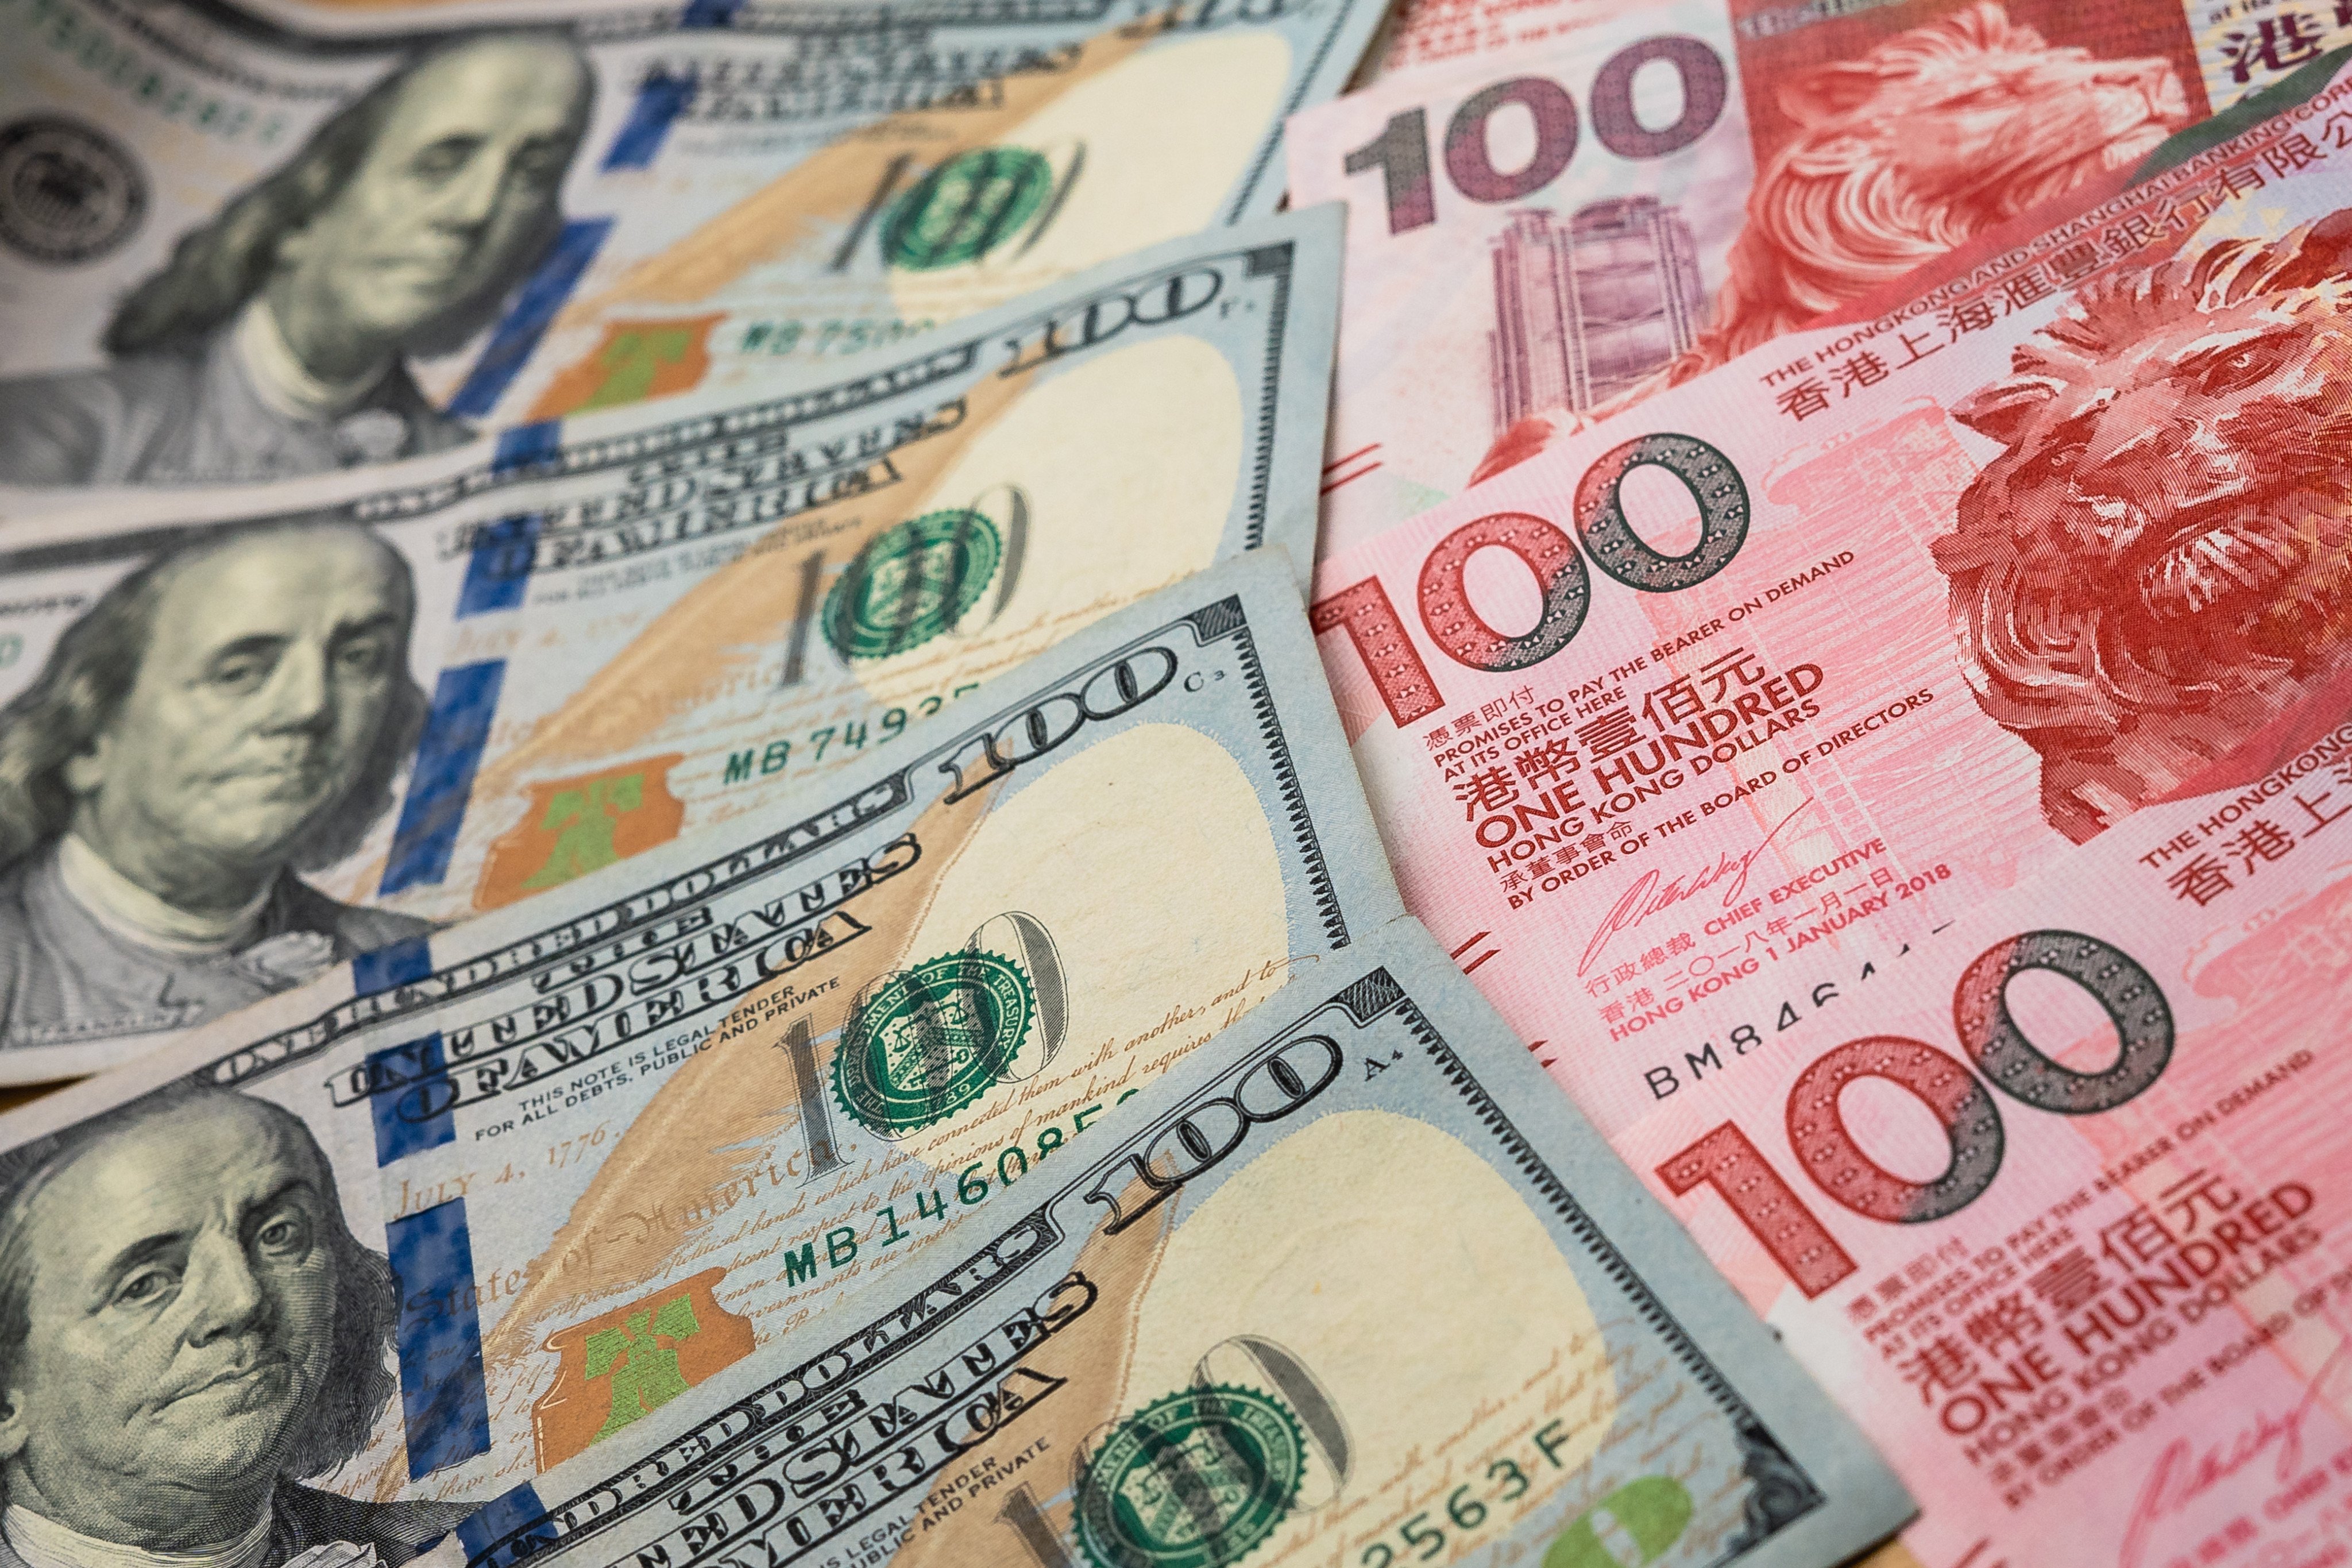 Hong Kong mutual funds attracted US$3.8 billion of net inflows in the first quarter of the year. Photo: Shutterstock